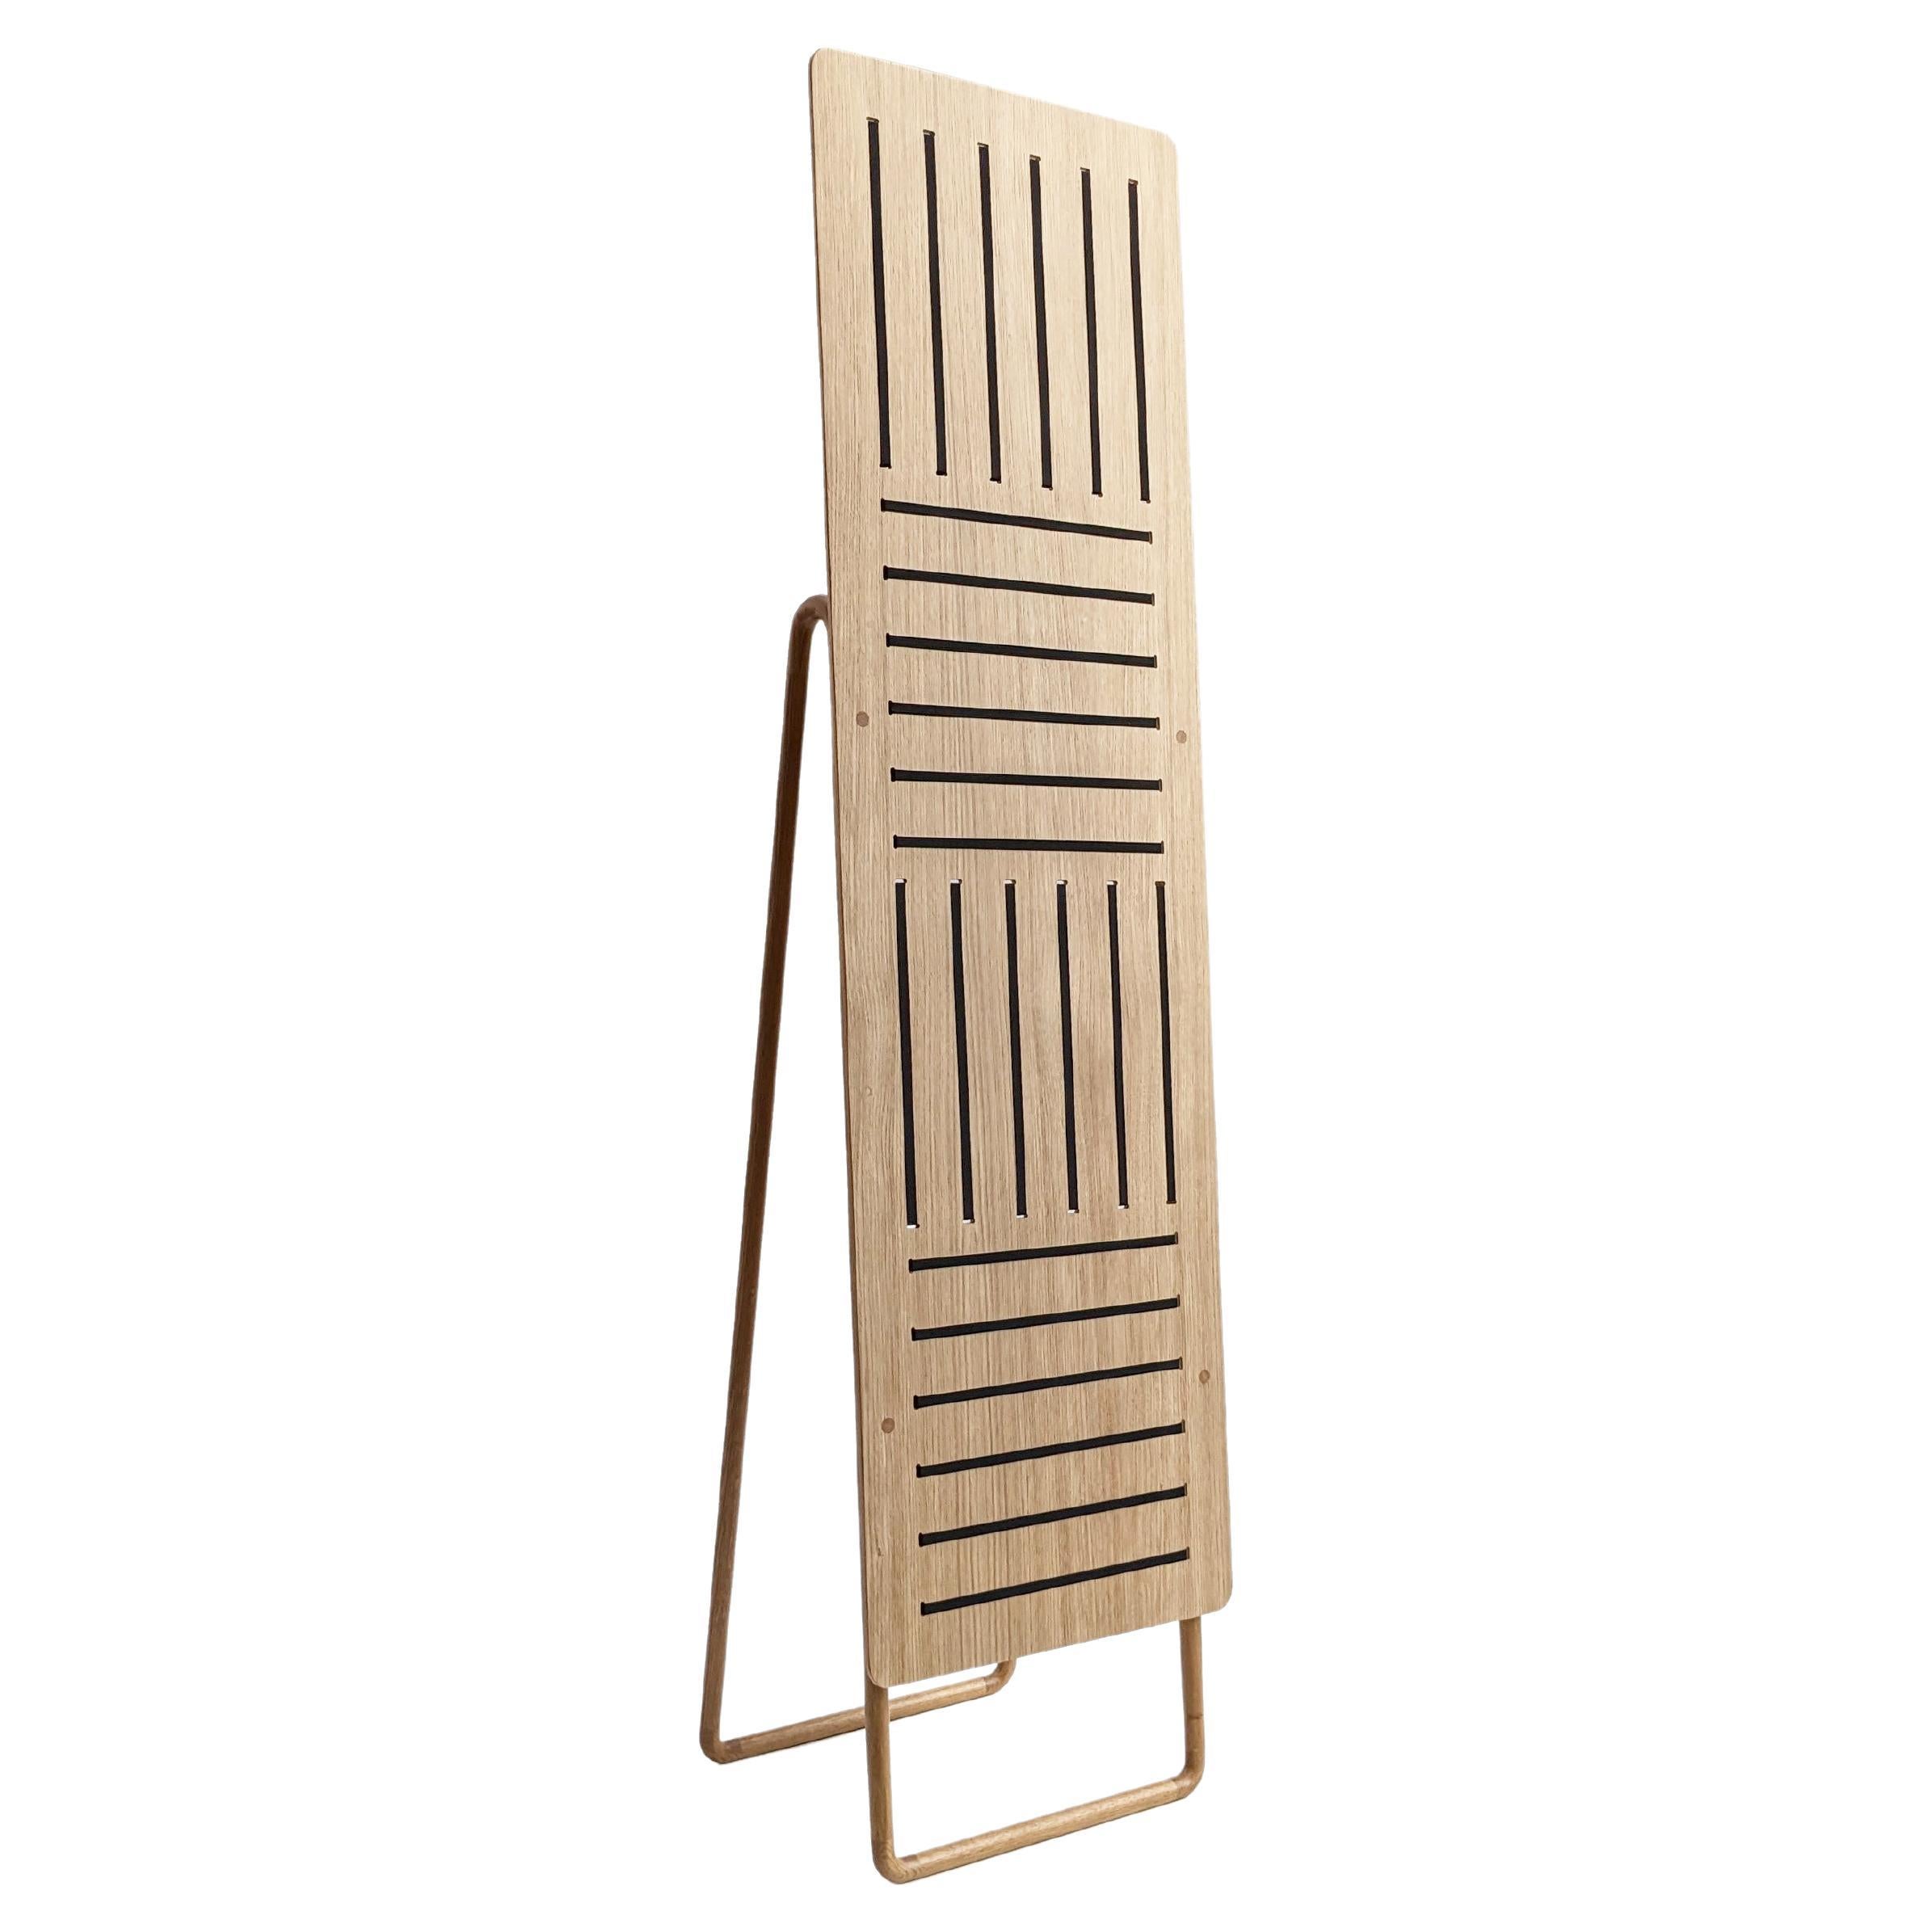 Strip Standing Wood, Display for Flat Objects by Lotti Gostic Studio For Sale